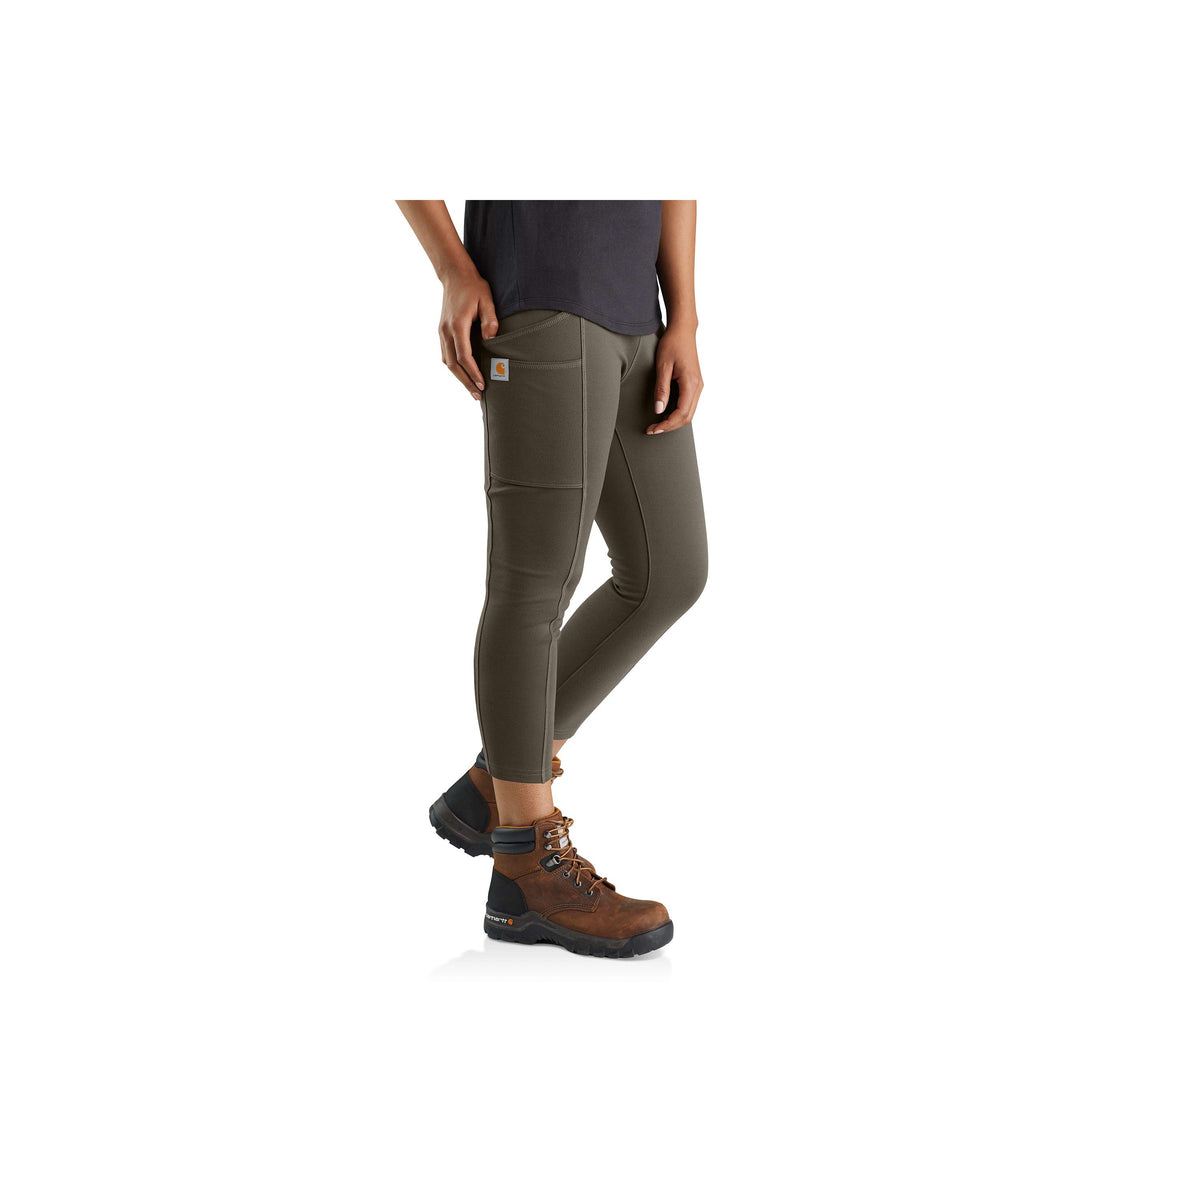 NWT CARHARTT WOMEN’S FORCE FITTED UTILITY LEGGING Size L 12-14 TALL